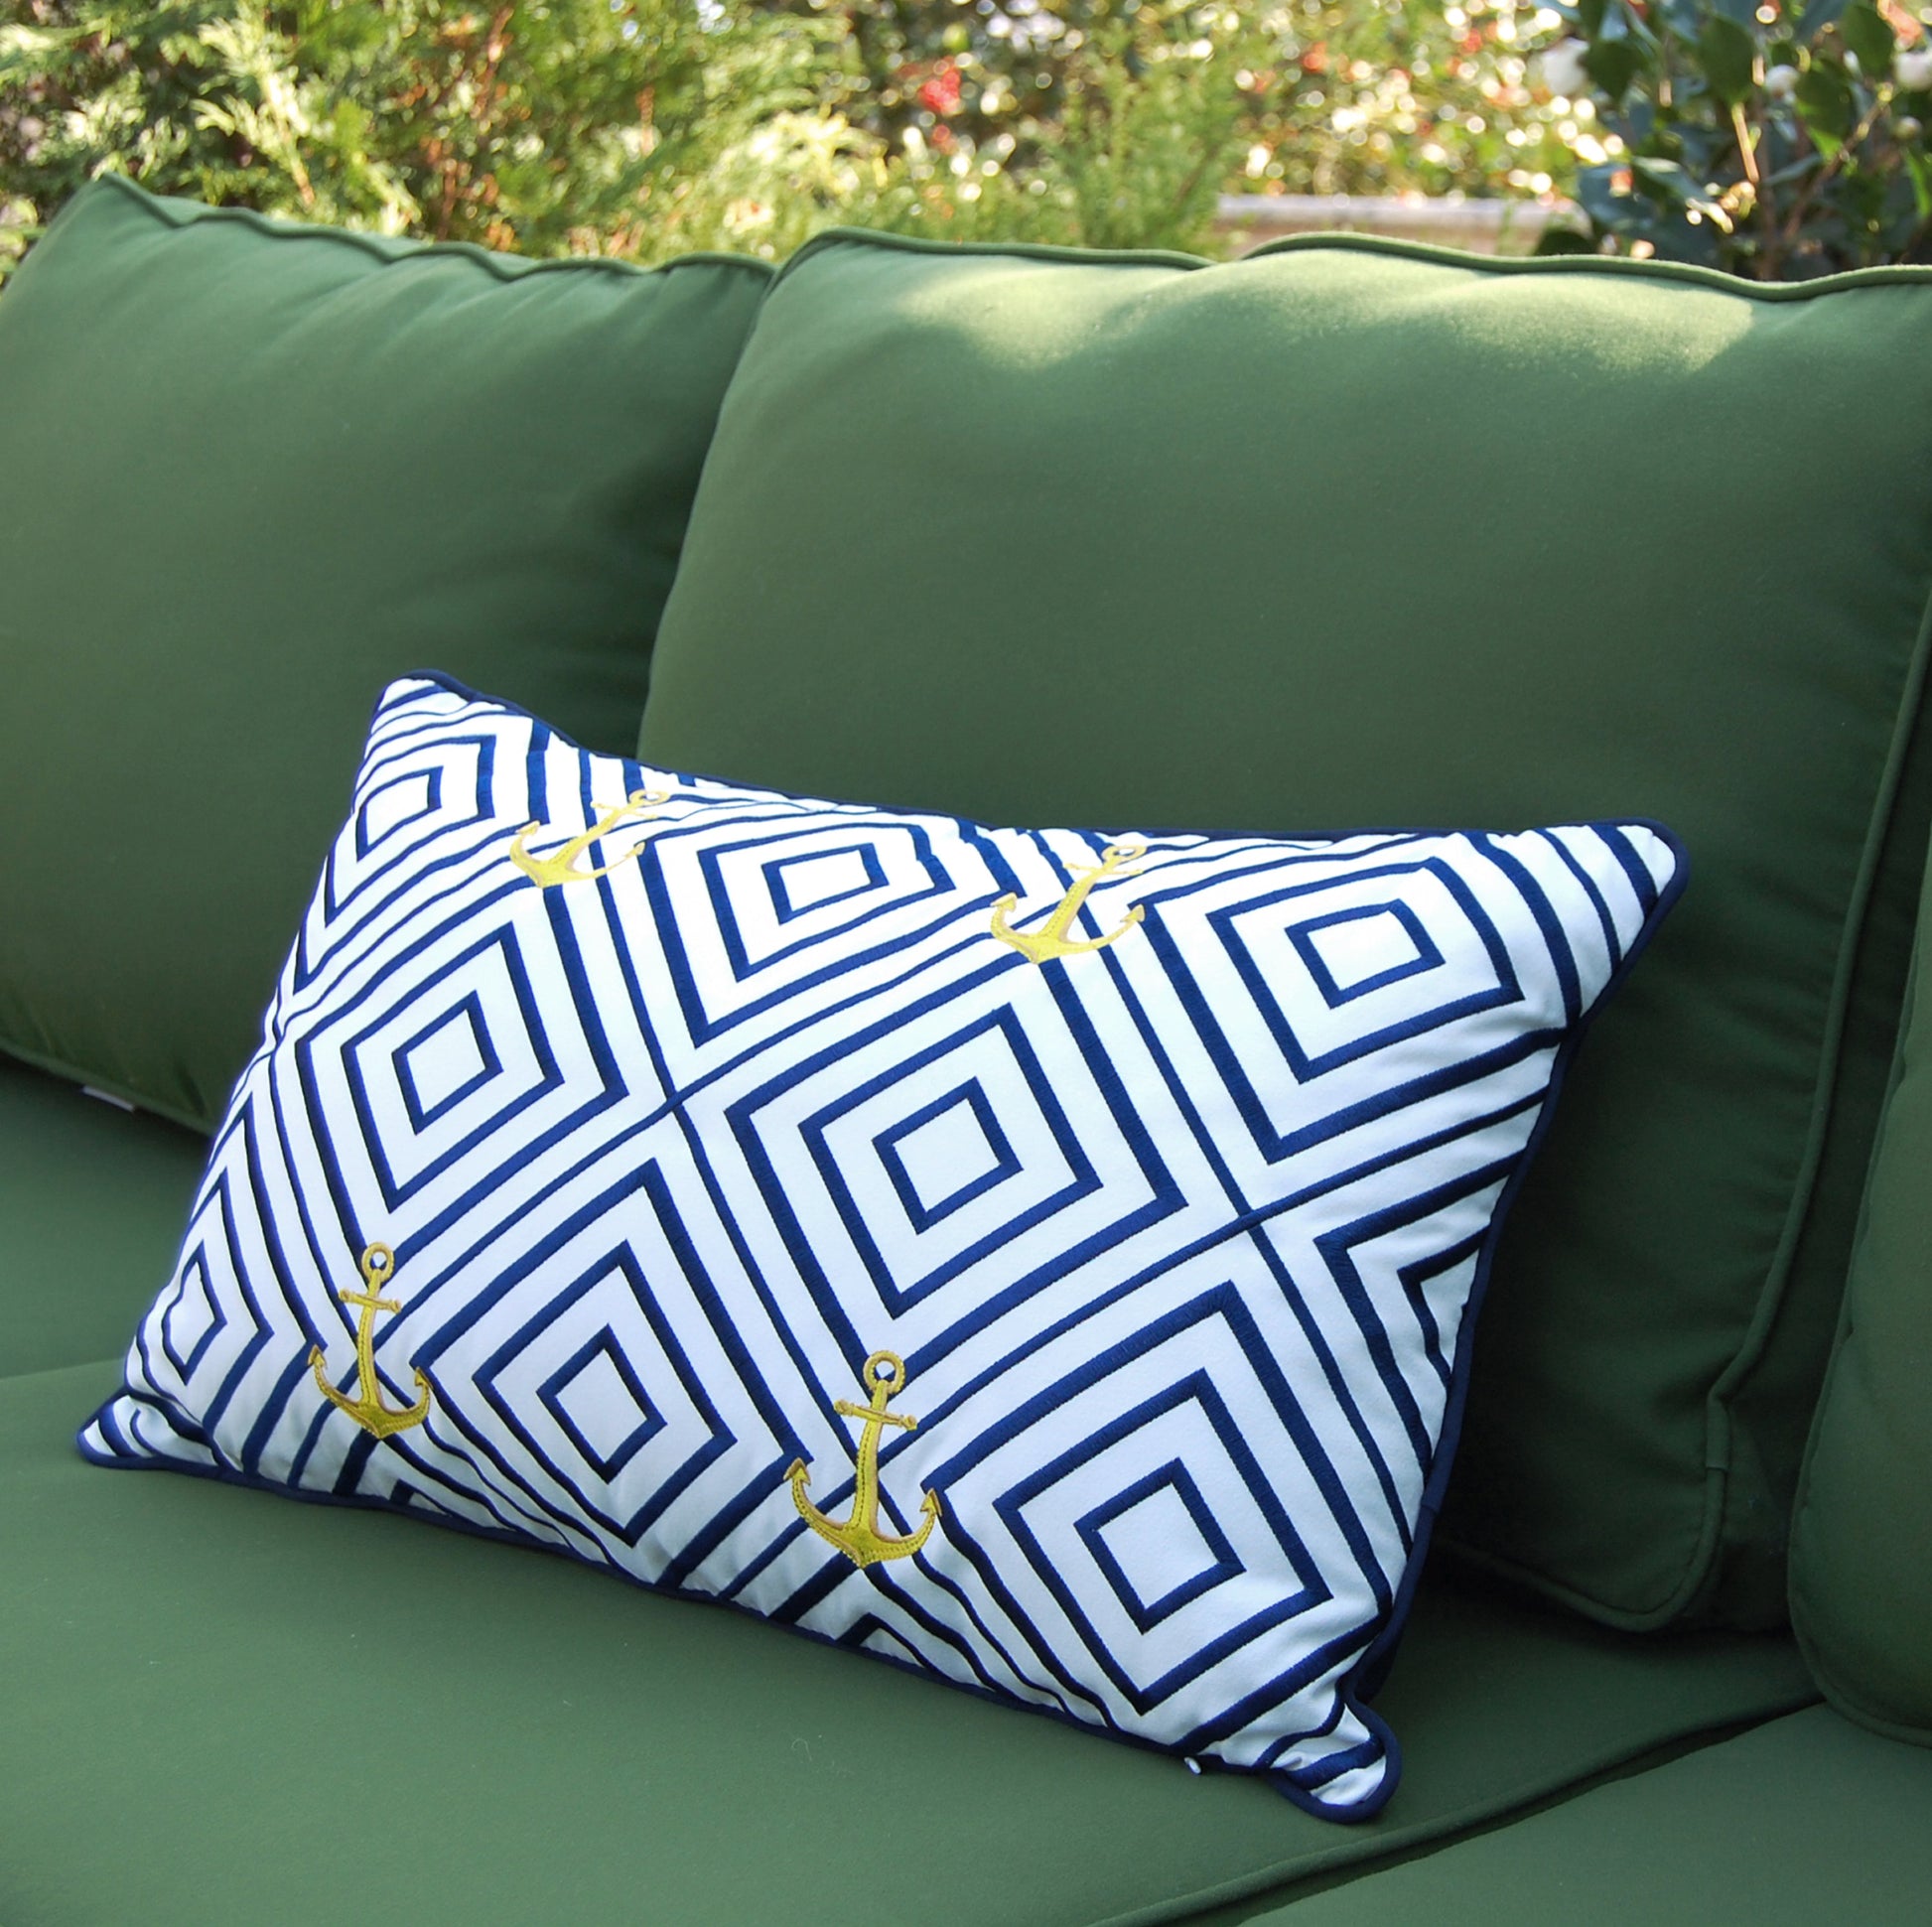 Geo Pattern Nautical pillow styled on a green outdoor couch.